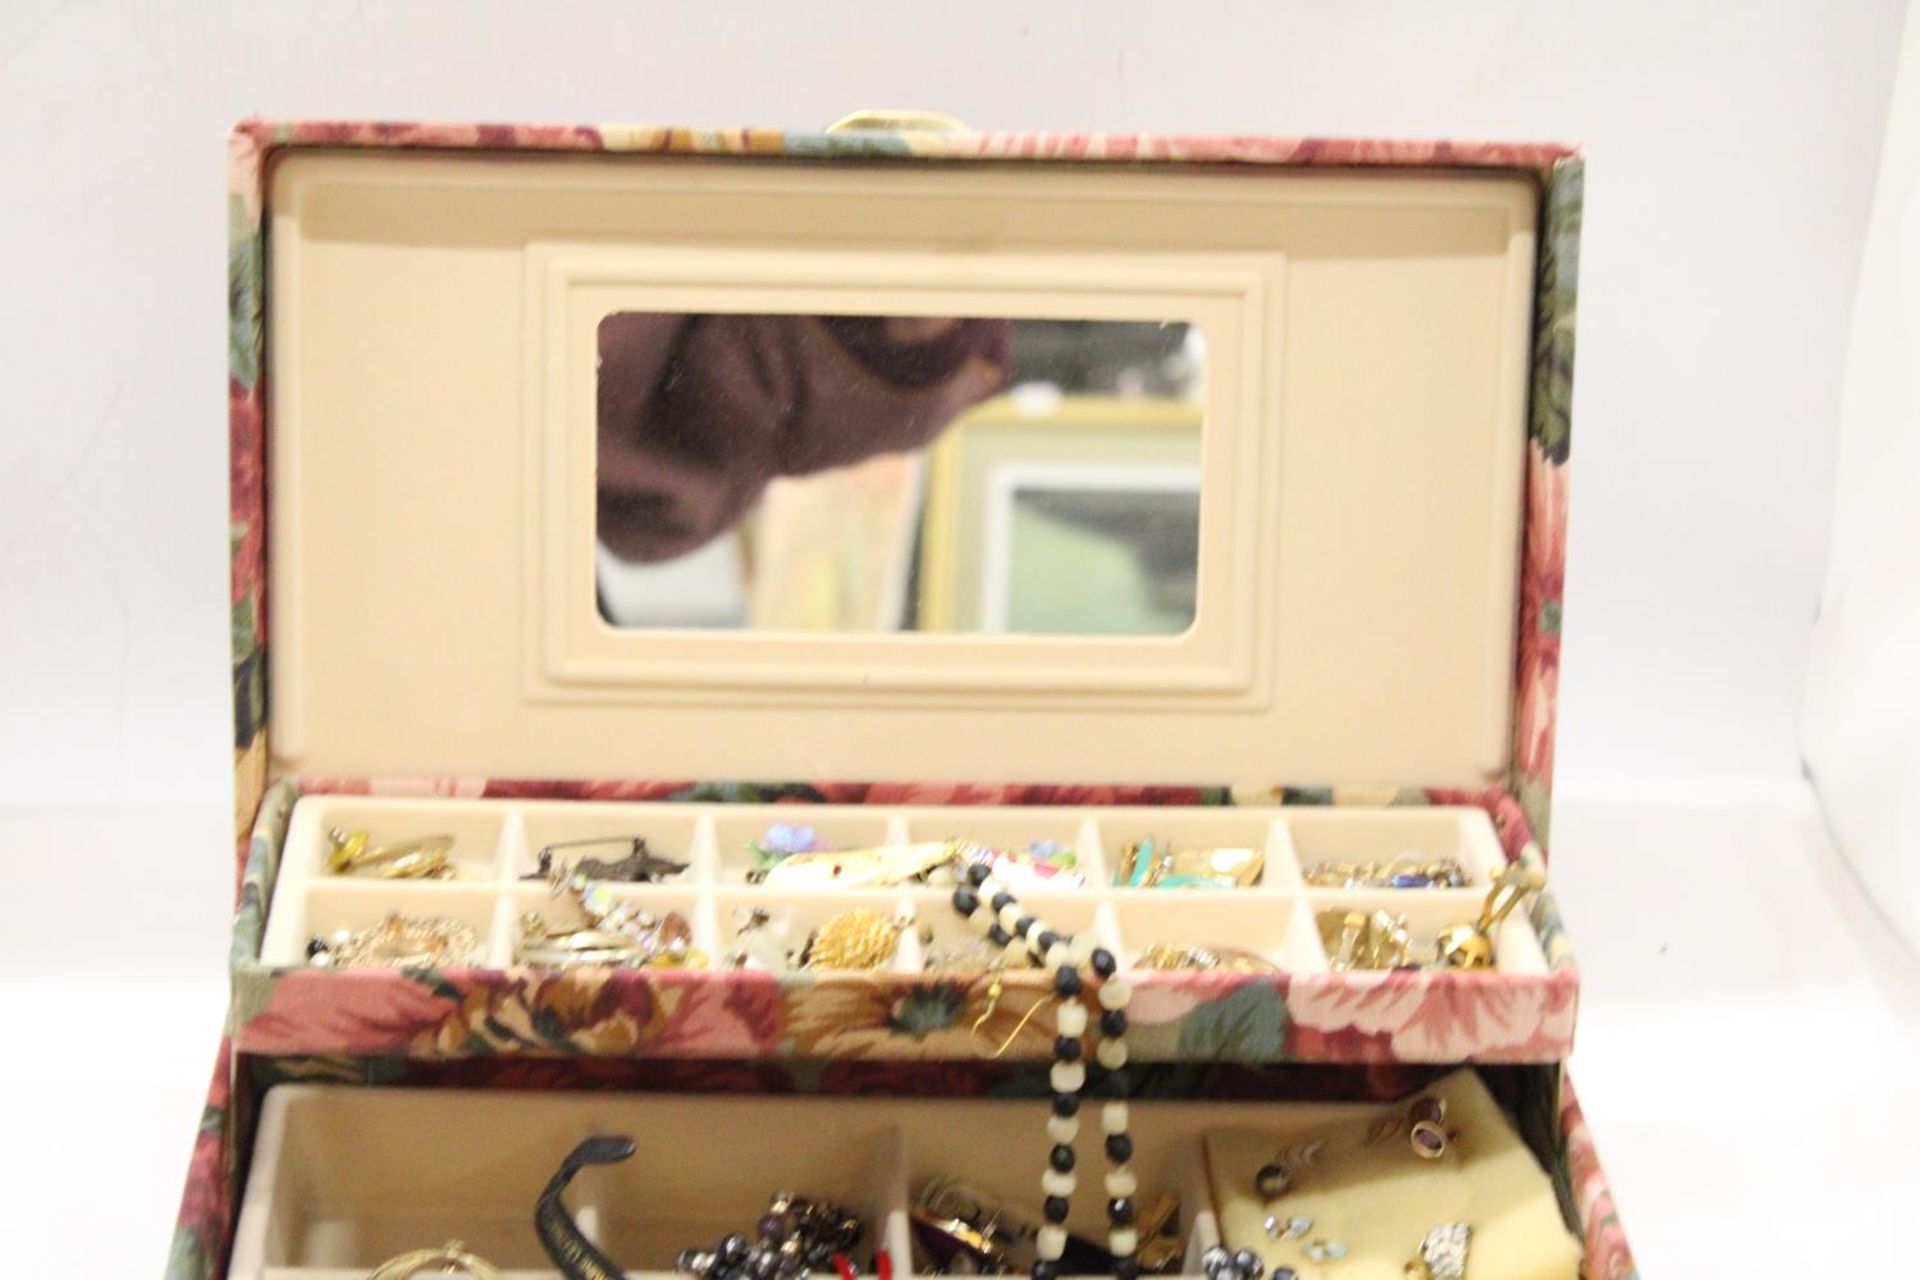 A VINTAGE JEWELLERY BOX CONTAINING VARIOUS COSTUME JEWELLERY INCLUDING EARRINGS, BROOCHS, - Image 2 of 6